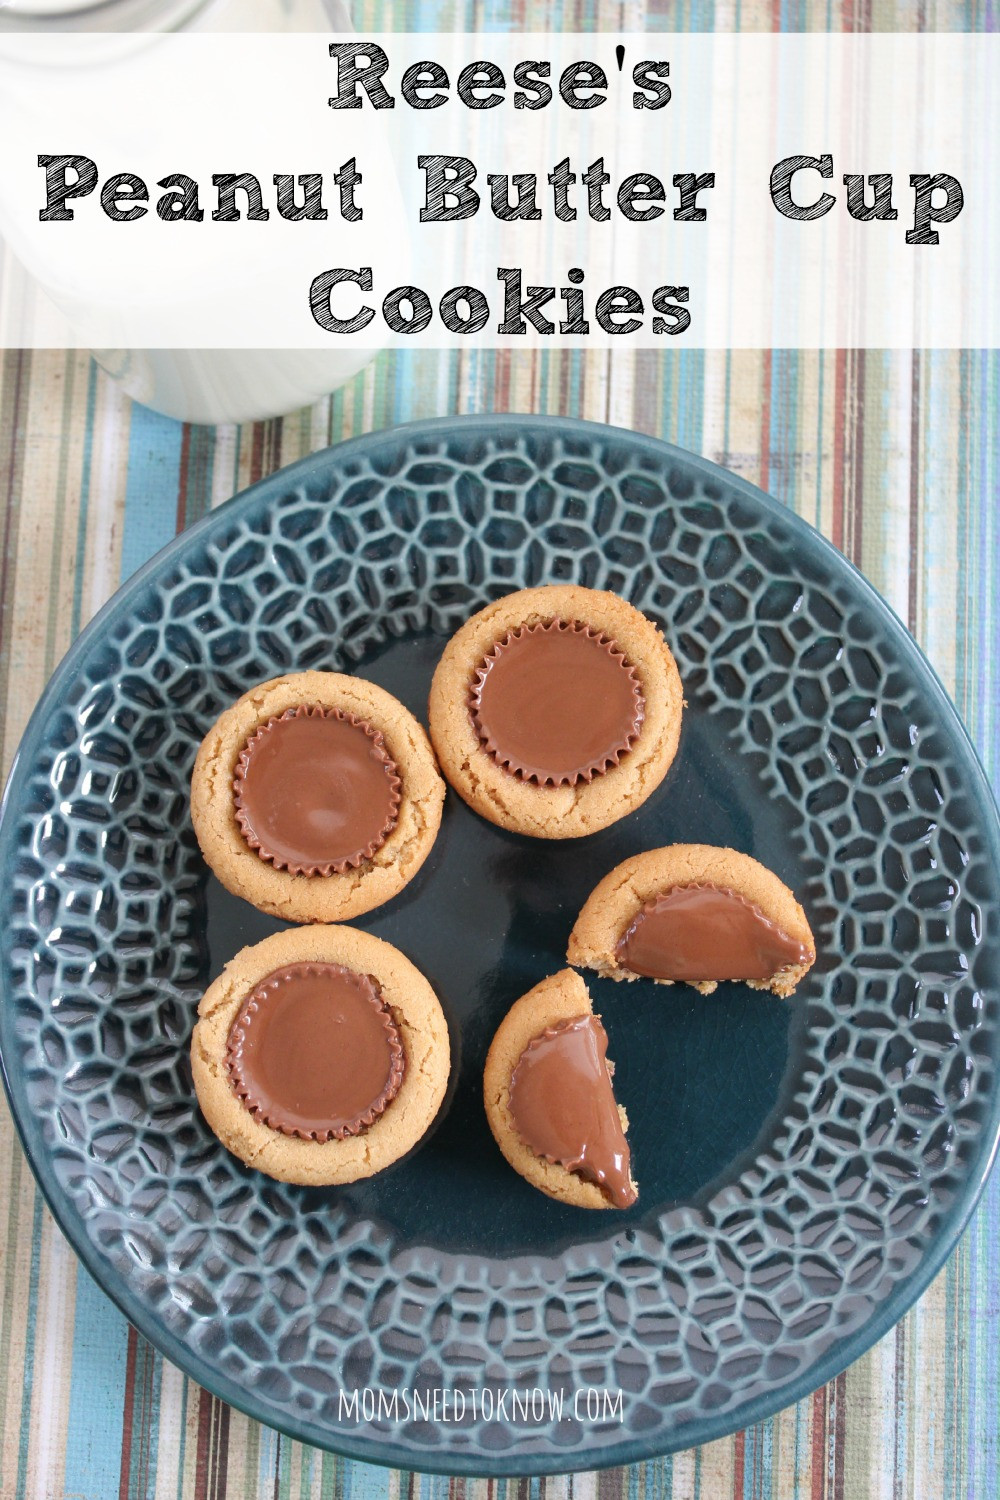 Peanut Butter Cookies With Reeses Cup
 Reese s Peanut Butter Cup Cookies